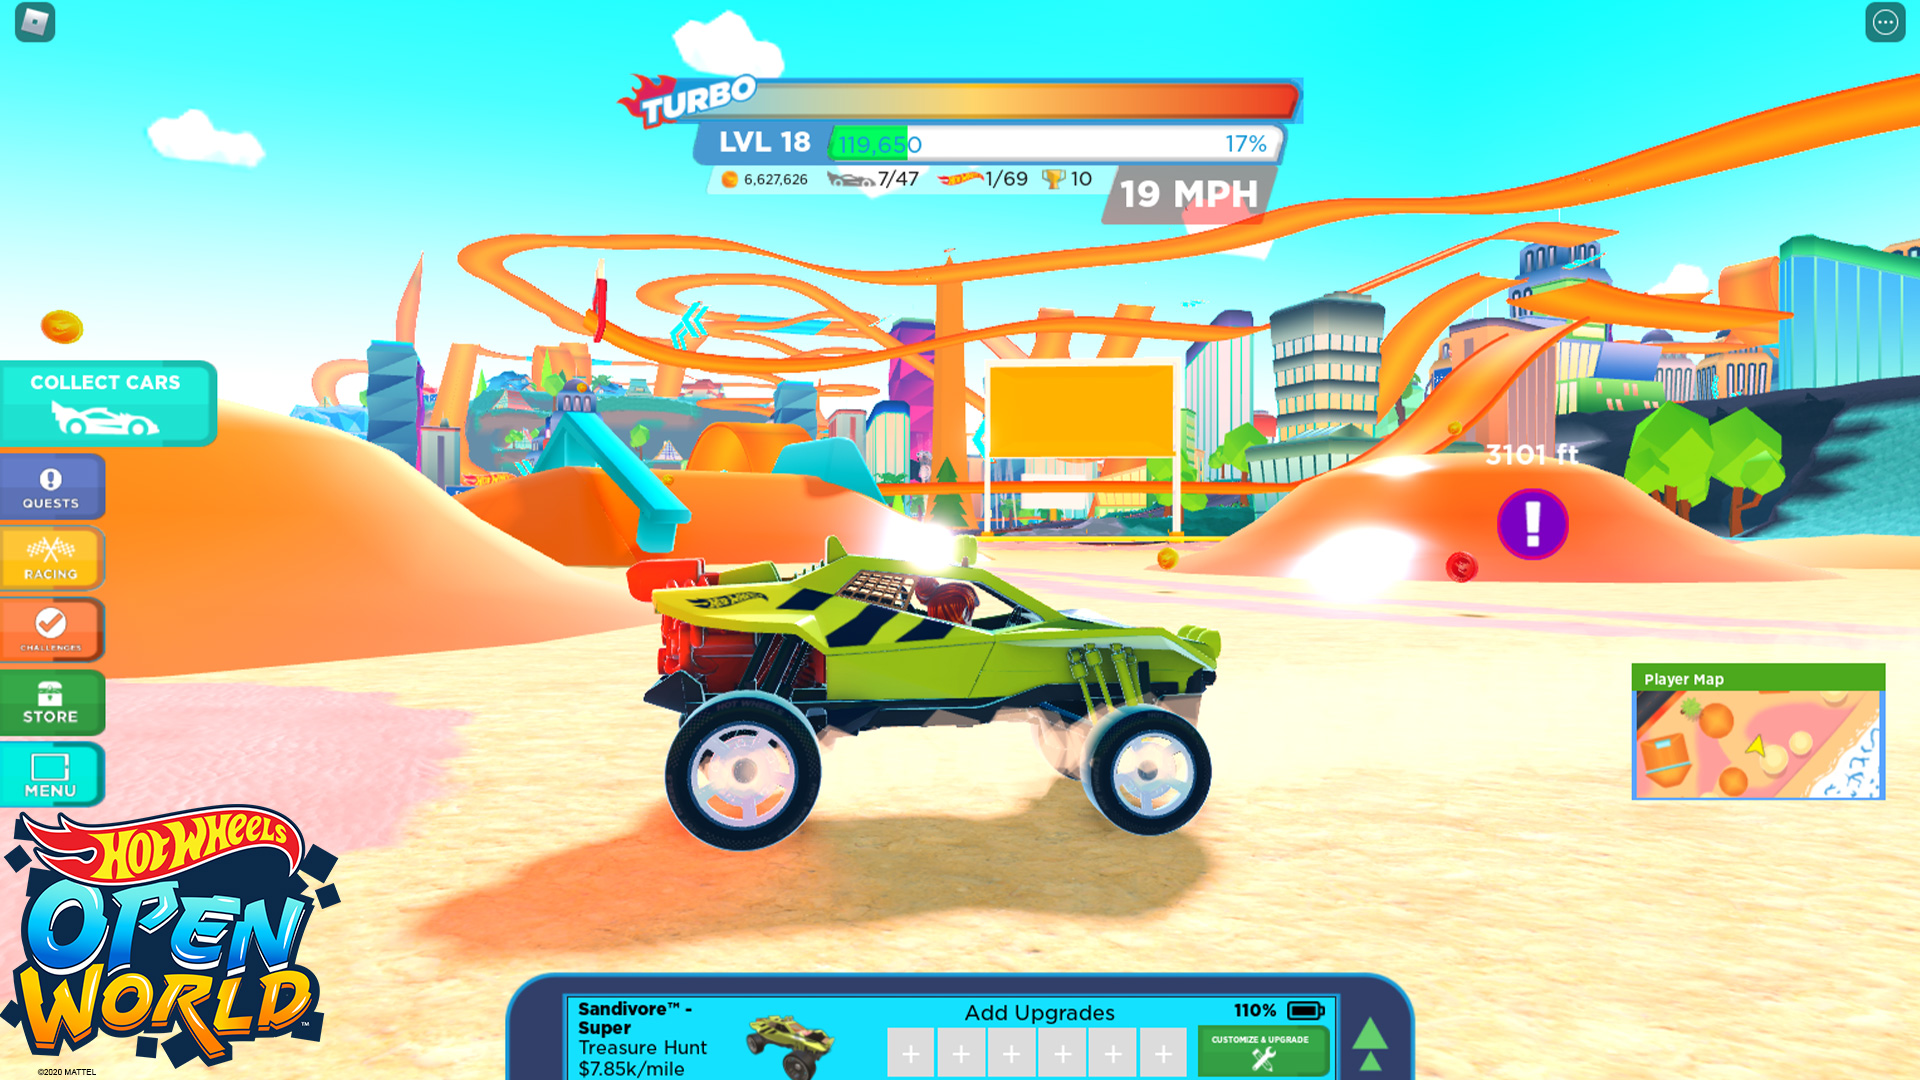 Mattel S Hot Wheels Open World Has Launched On Roblox - roblox games with trucks in them